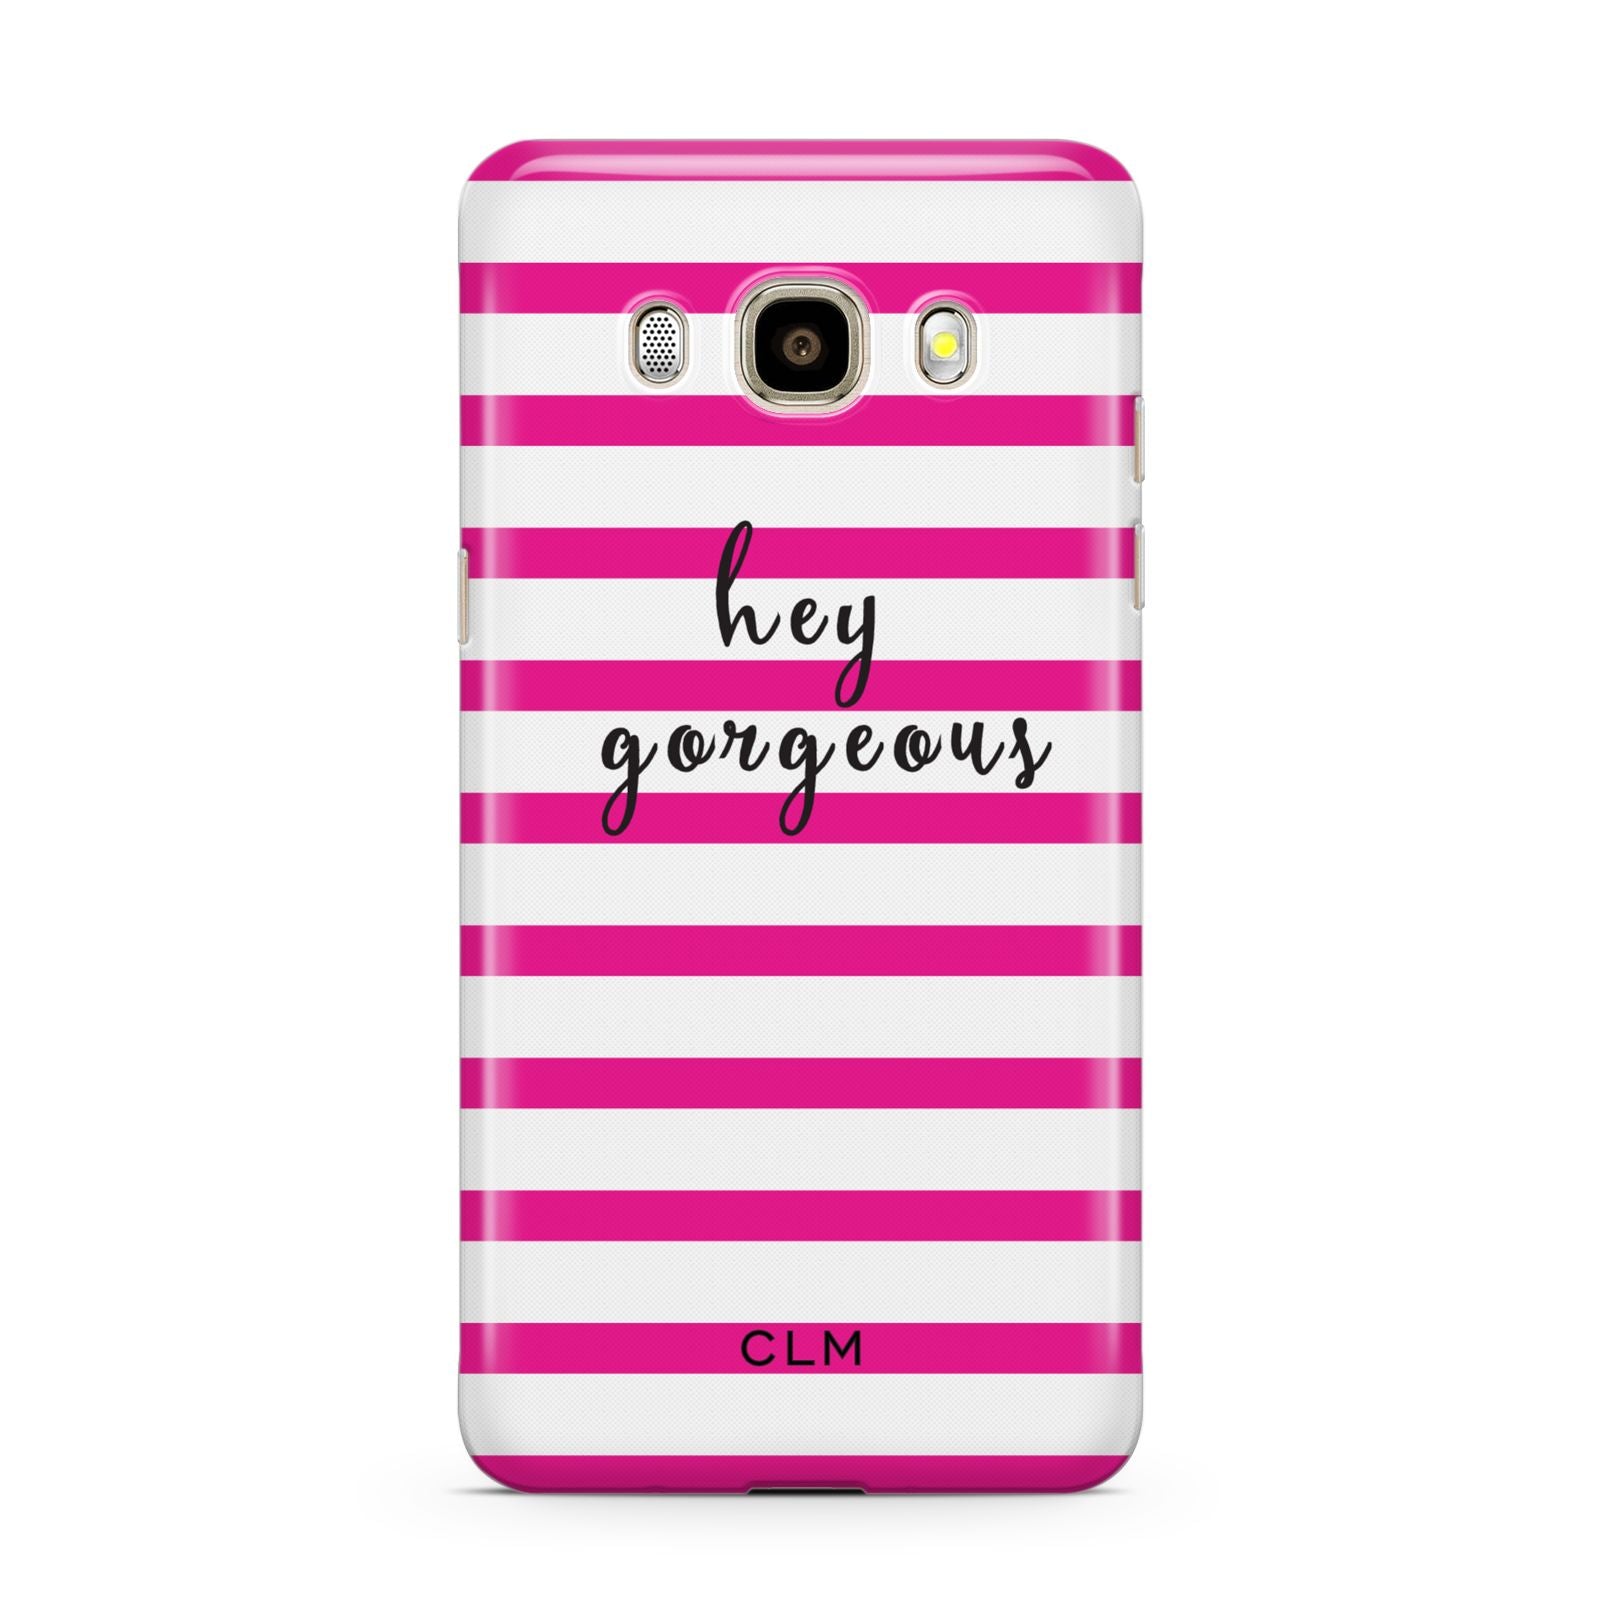 Personalised Initials Pink Striped Samsung Galaxy J7 2016 Case on gold phone